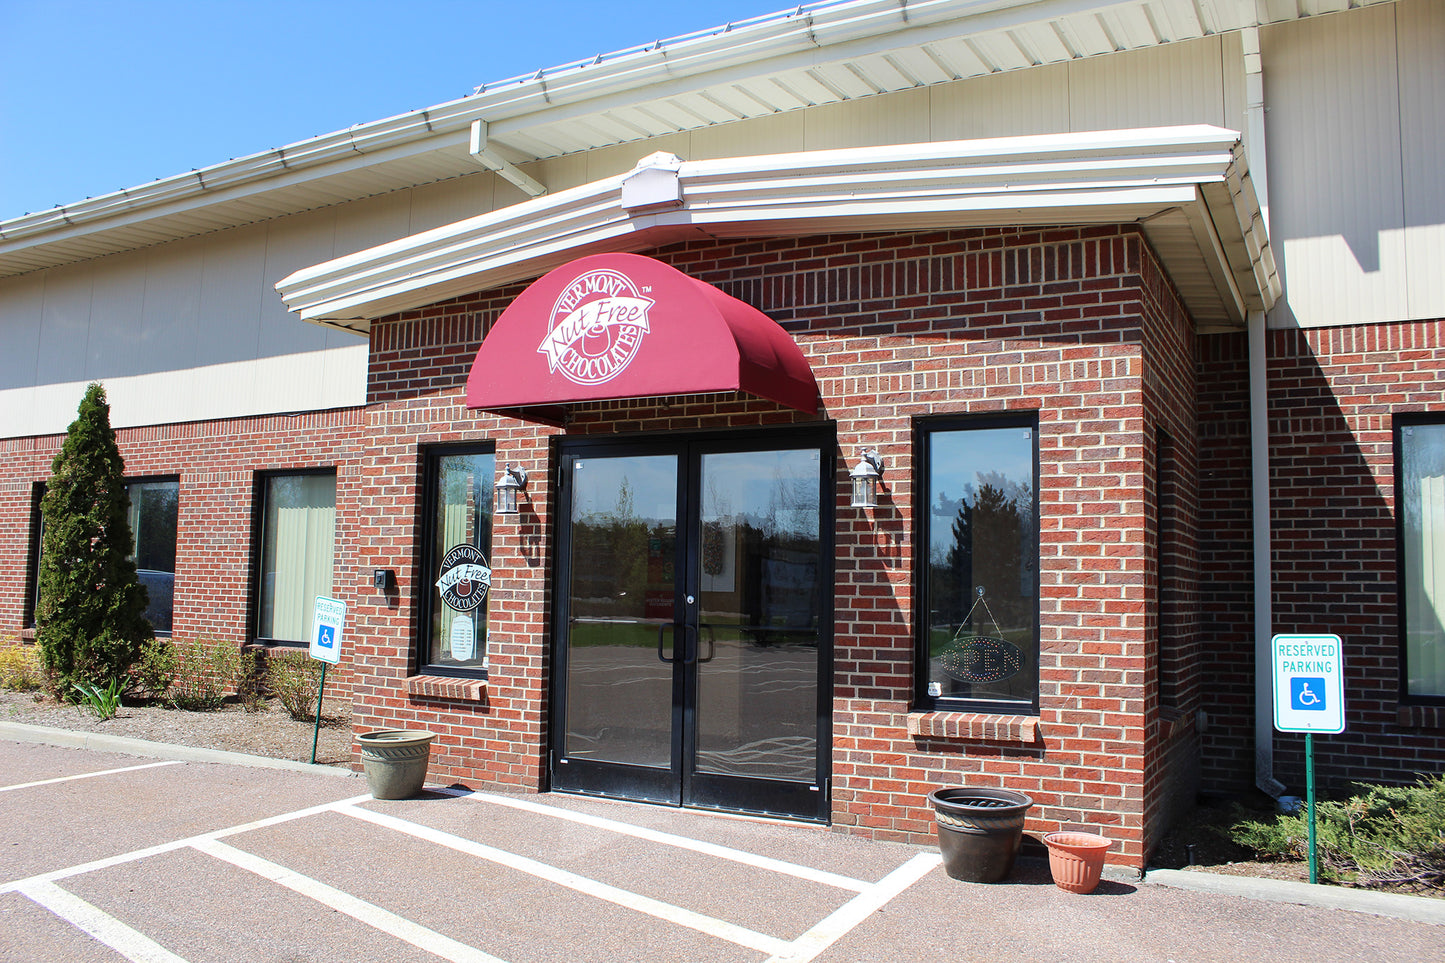 Front of Vermont Nut Free Chocolates factory store. Brick building with red awning. White Vermont Nut Free Chocolates logo on awning.